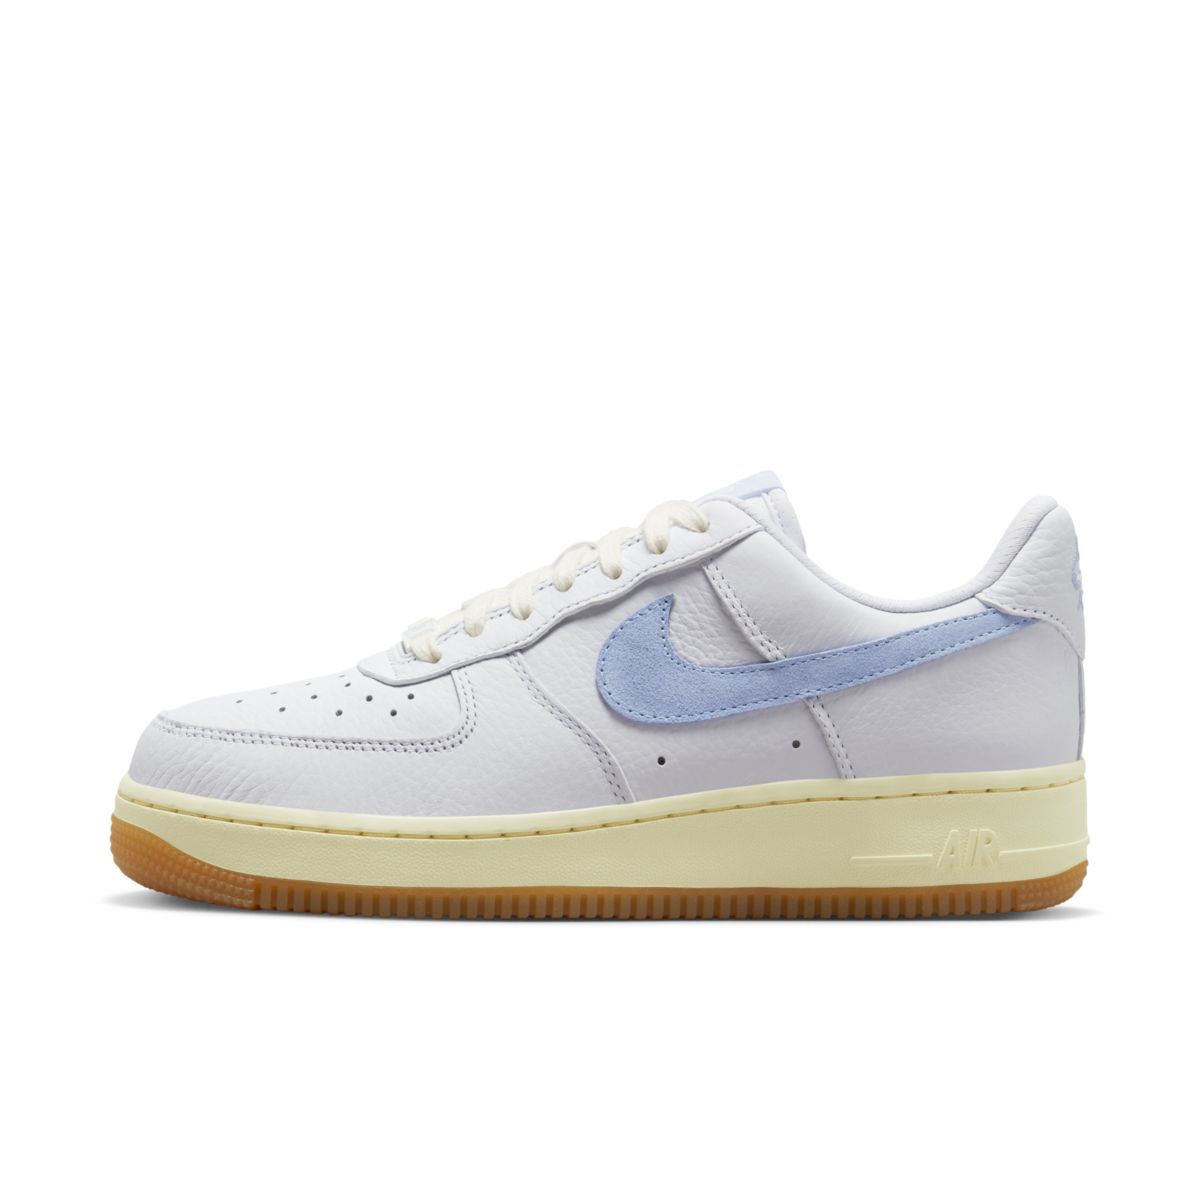 Nike Air Force 1 Low LX White Lilac Blue FD9867-100 2